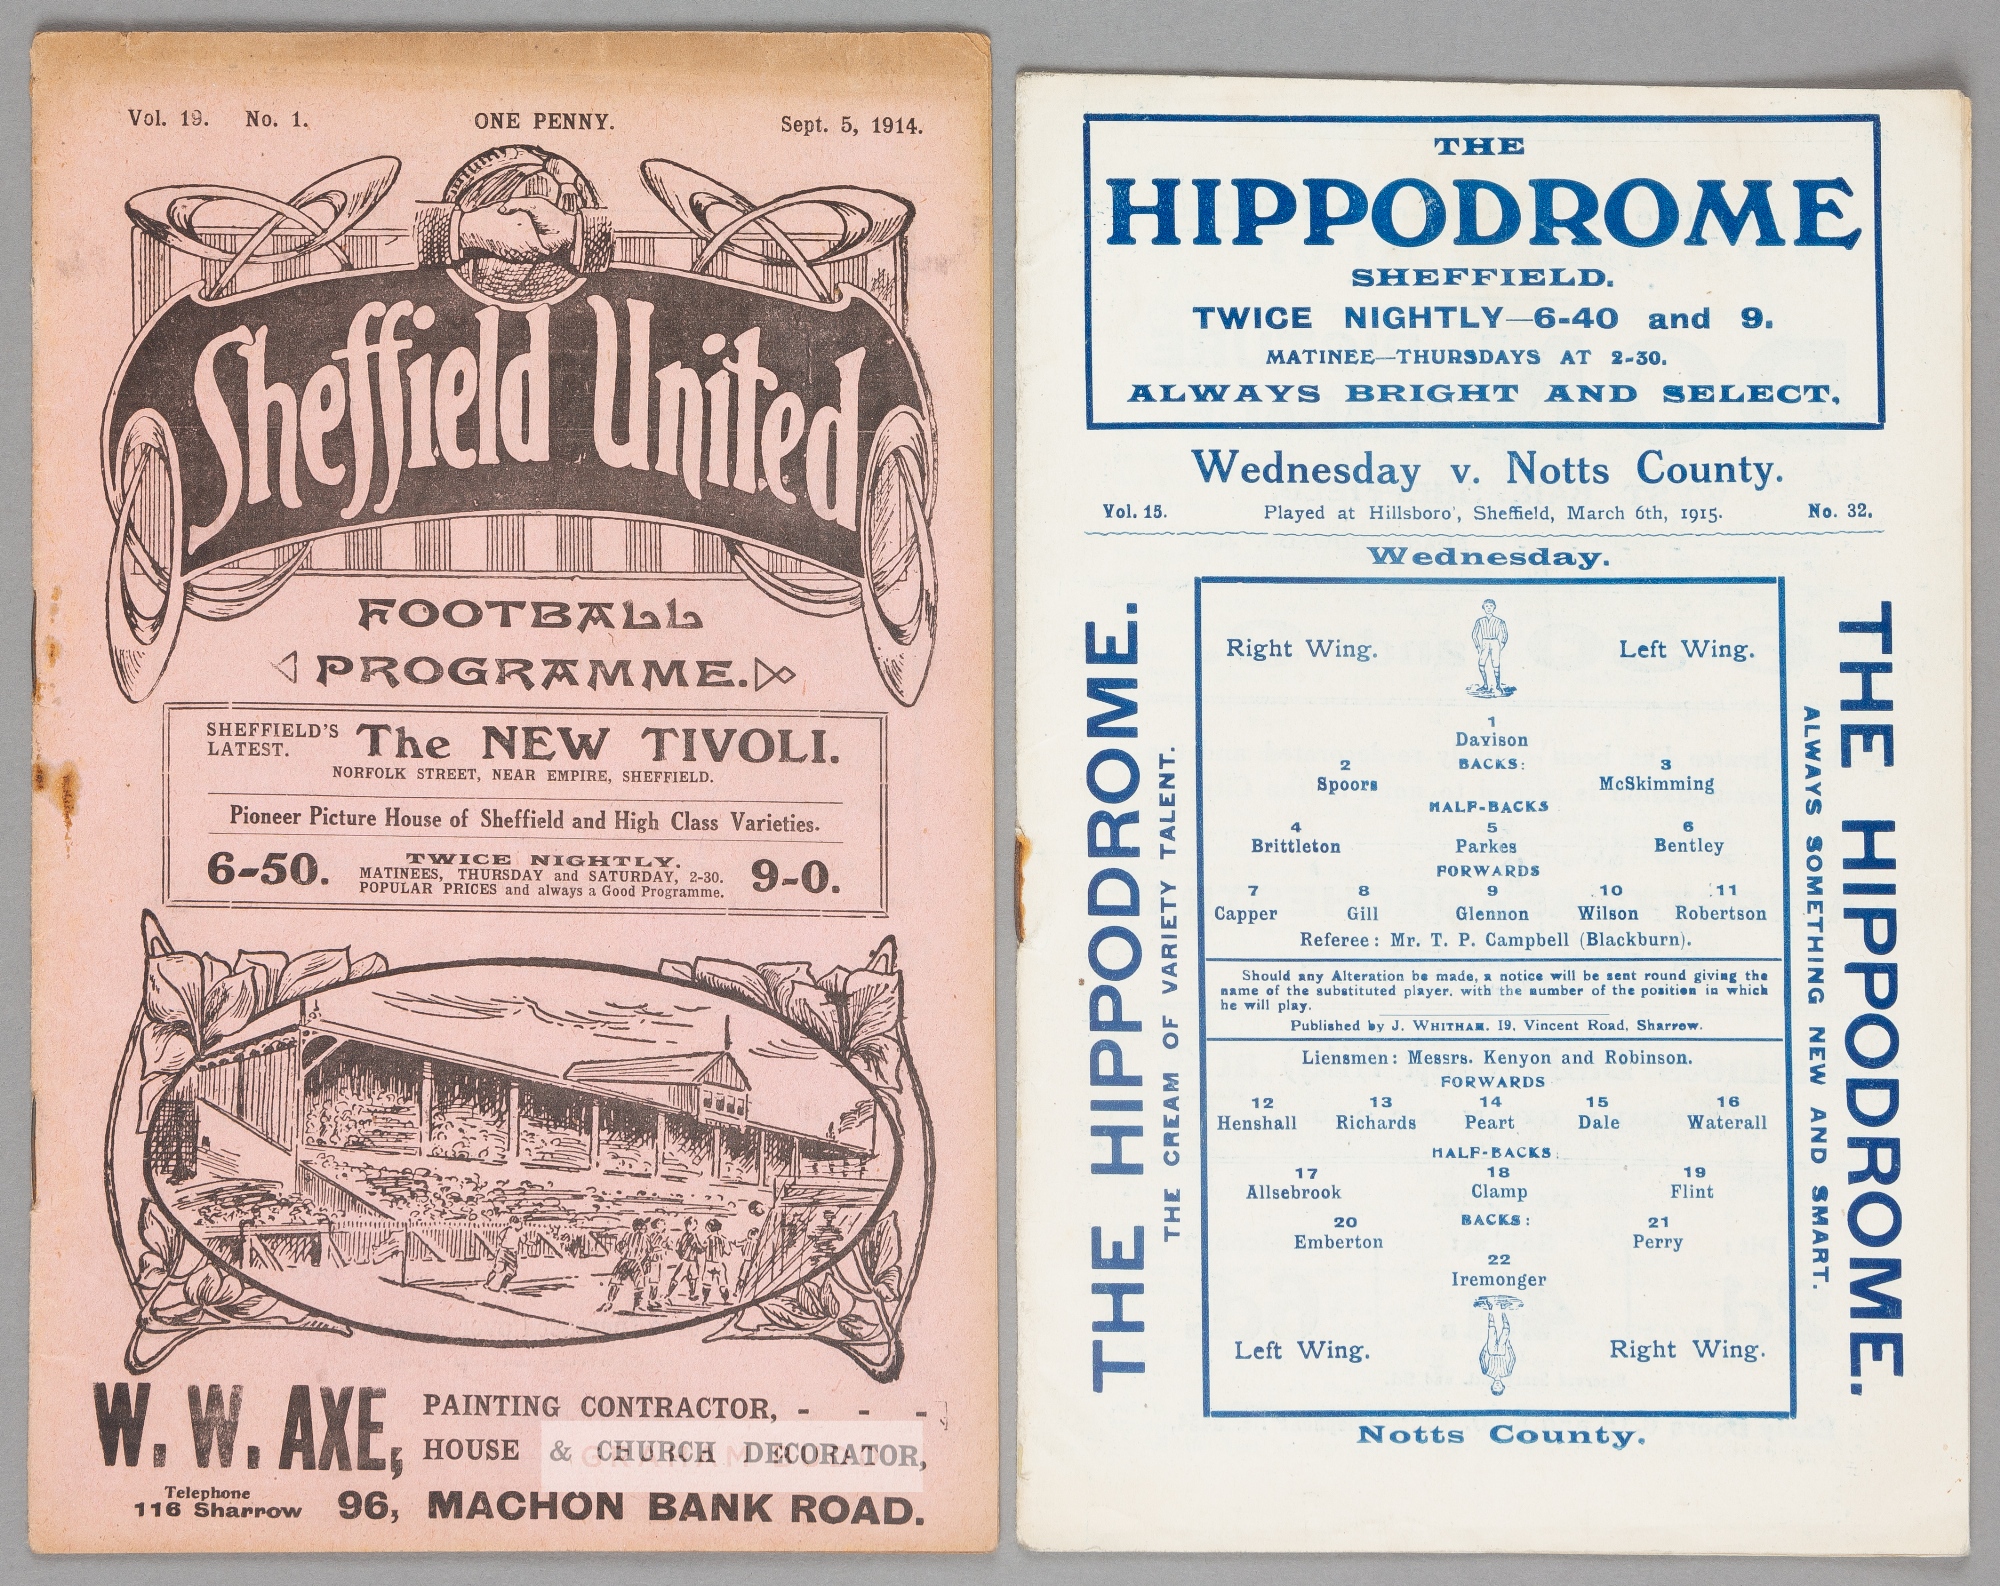 Two programmes for The [Sheffield] Wednesday in season 1914-15, F.L. Division One fixtures, away at